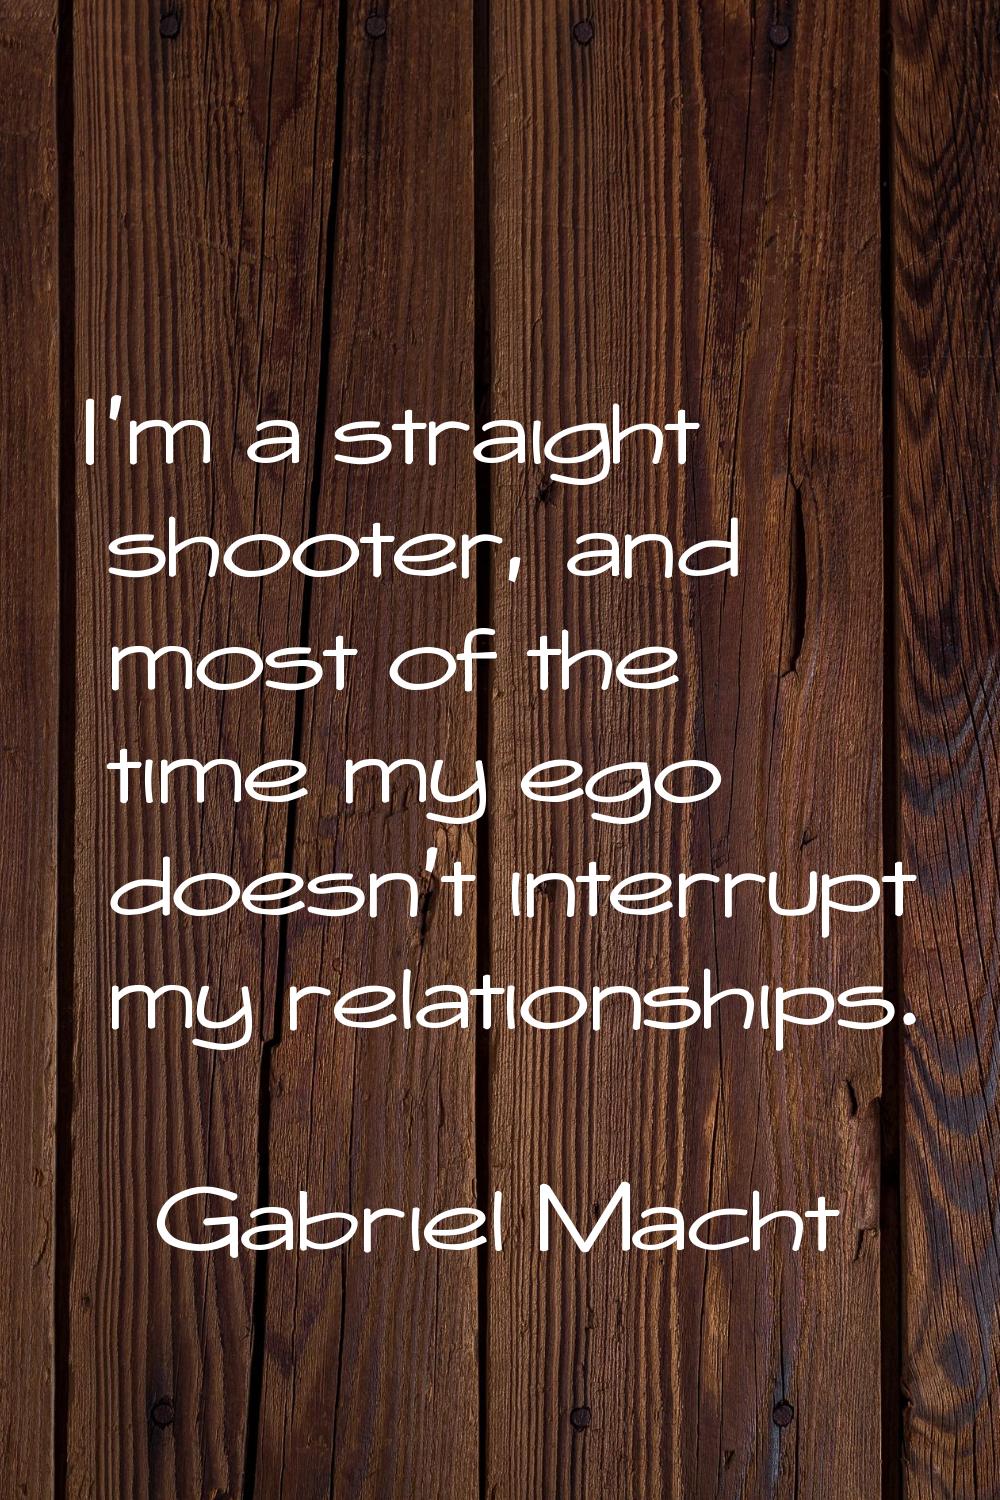 I'm a straight shooter, and most of the time my ego doesn't interrupt my relationships.